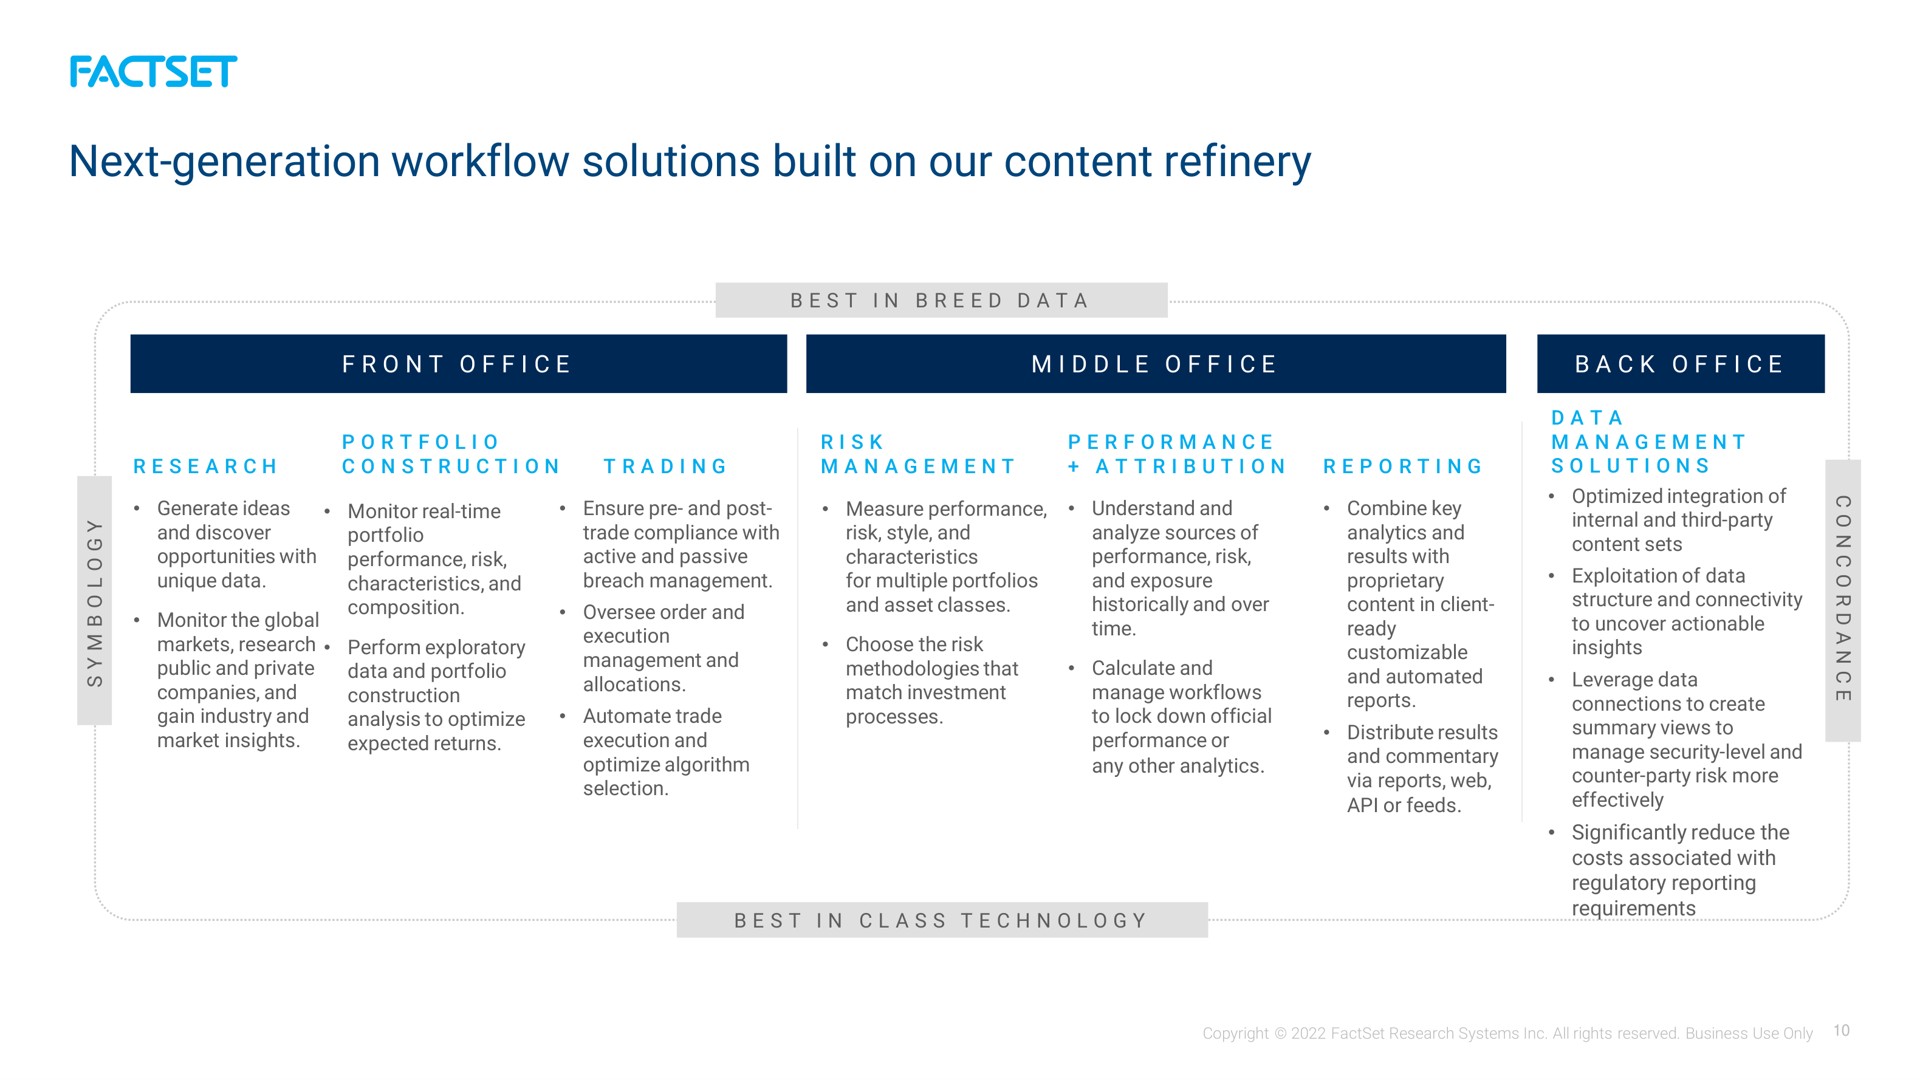 next generation solutions built on our content refinery | Factset